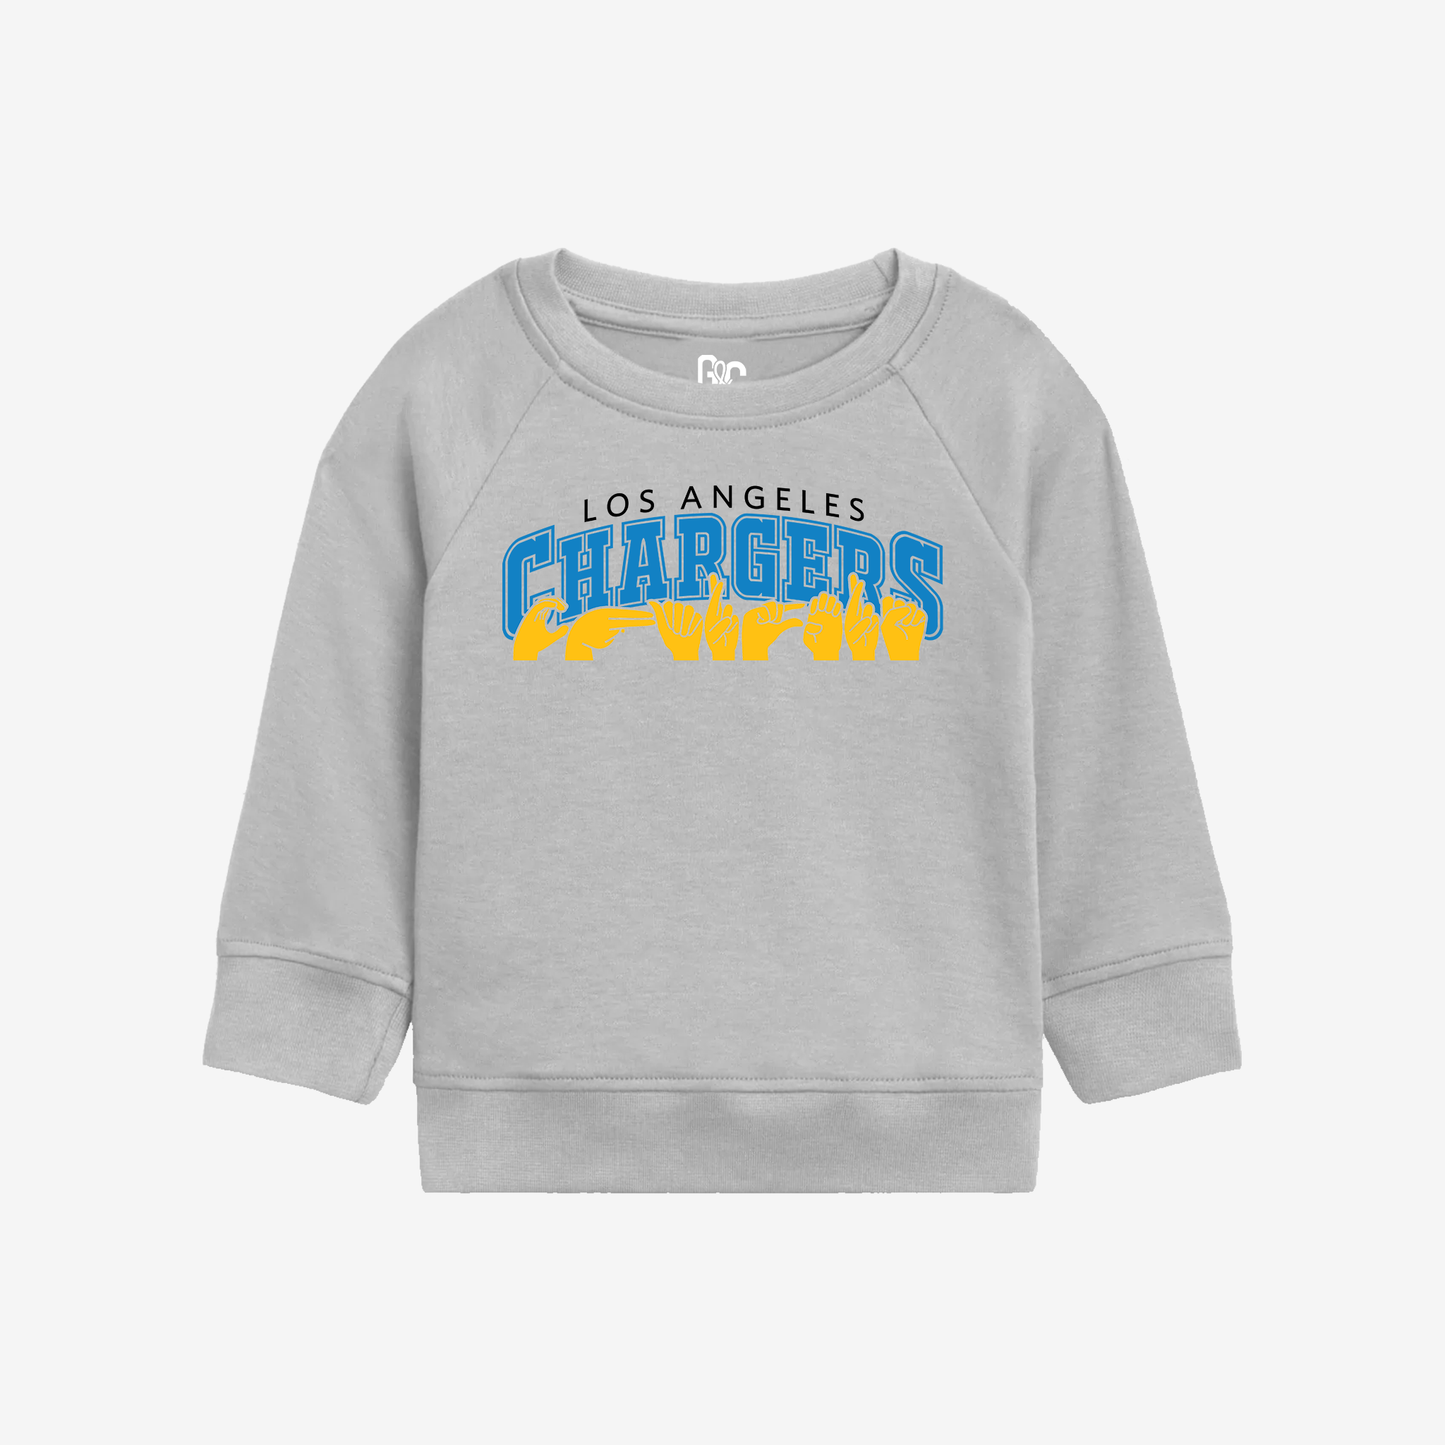 Los Angeles Chargers Toddler Crewneck